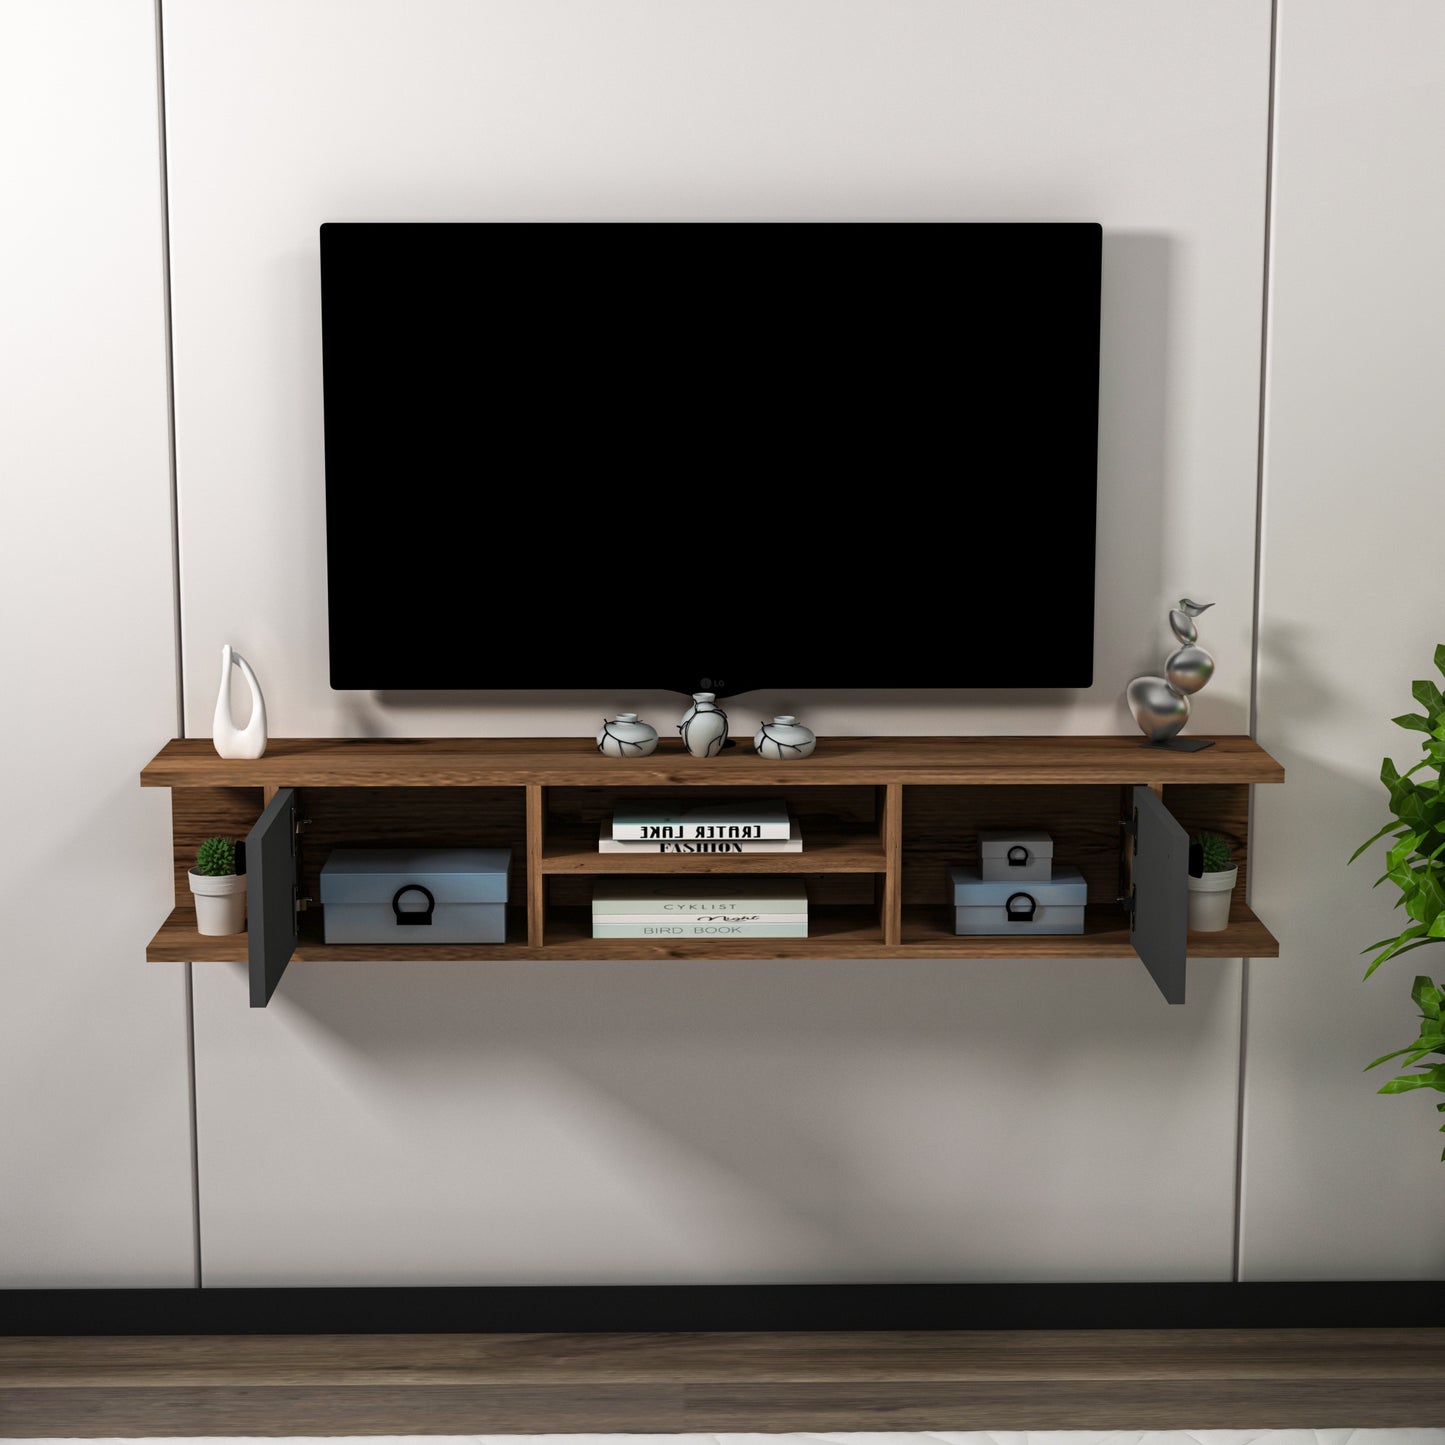 Joe Floating TV Stand with Shelves and Cabinets